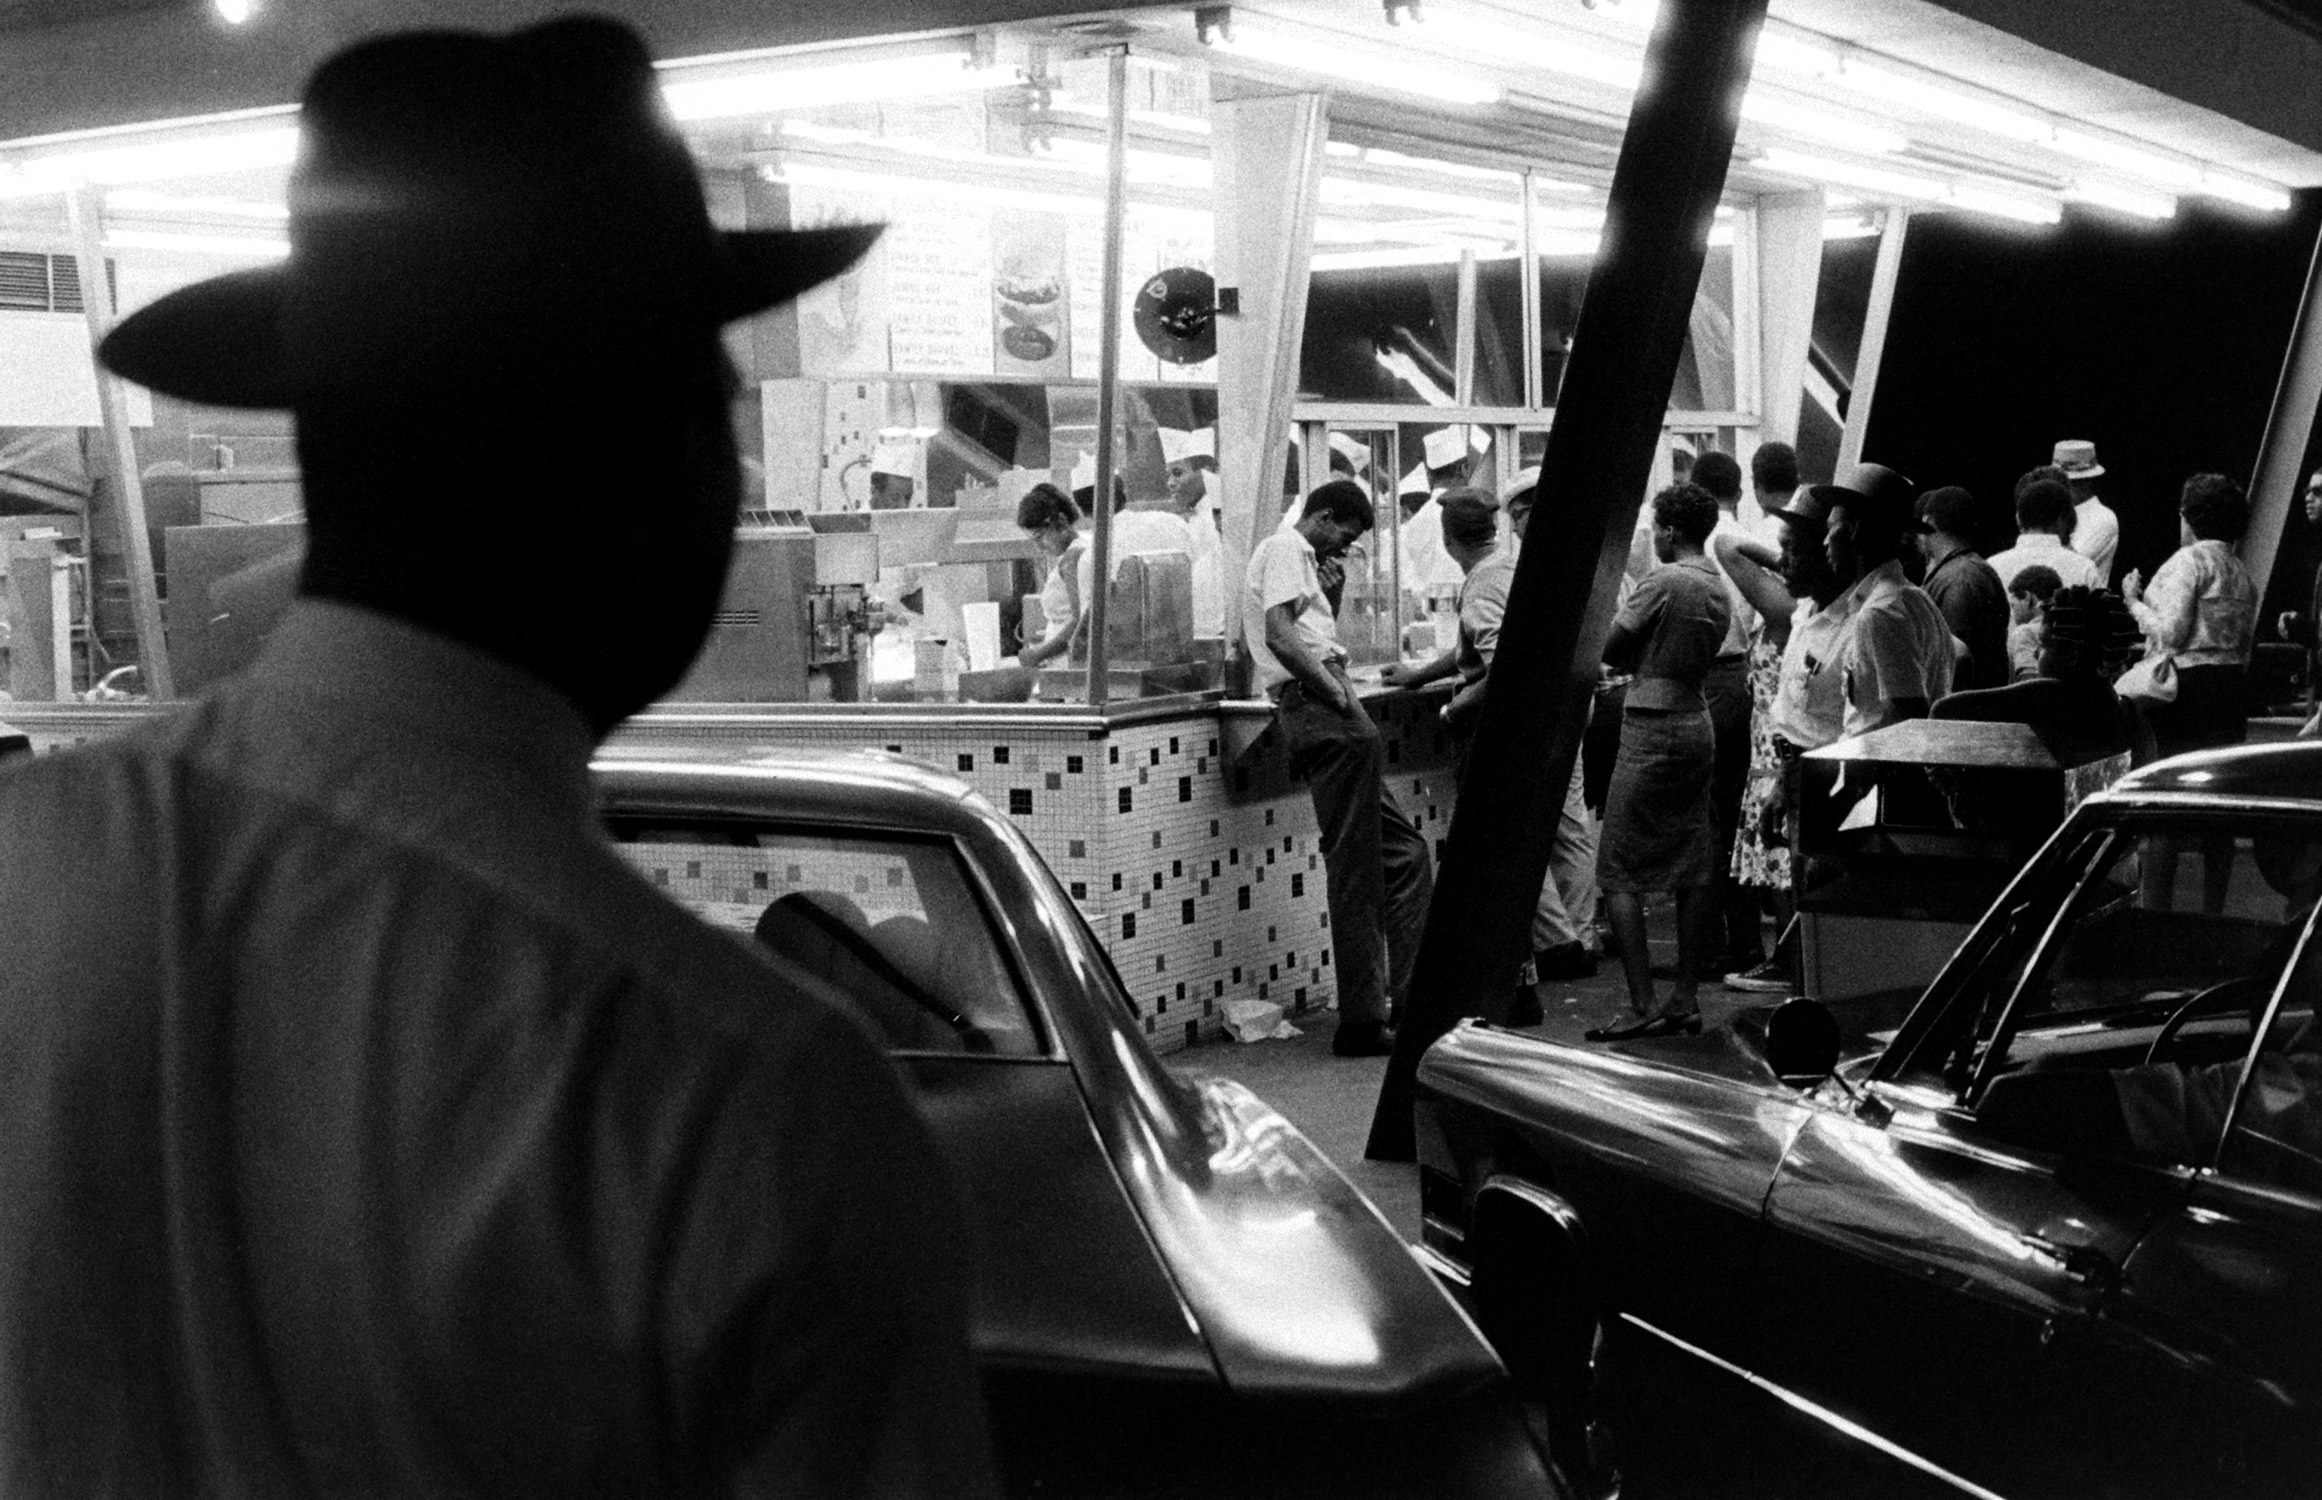 At a drive-in restaurant plagued by brawling, three "rent-a-cops" —looking more authoritative in wide brimmed hats than city police—stand guard on weekends.